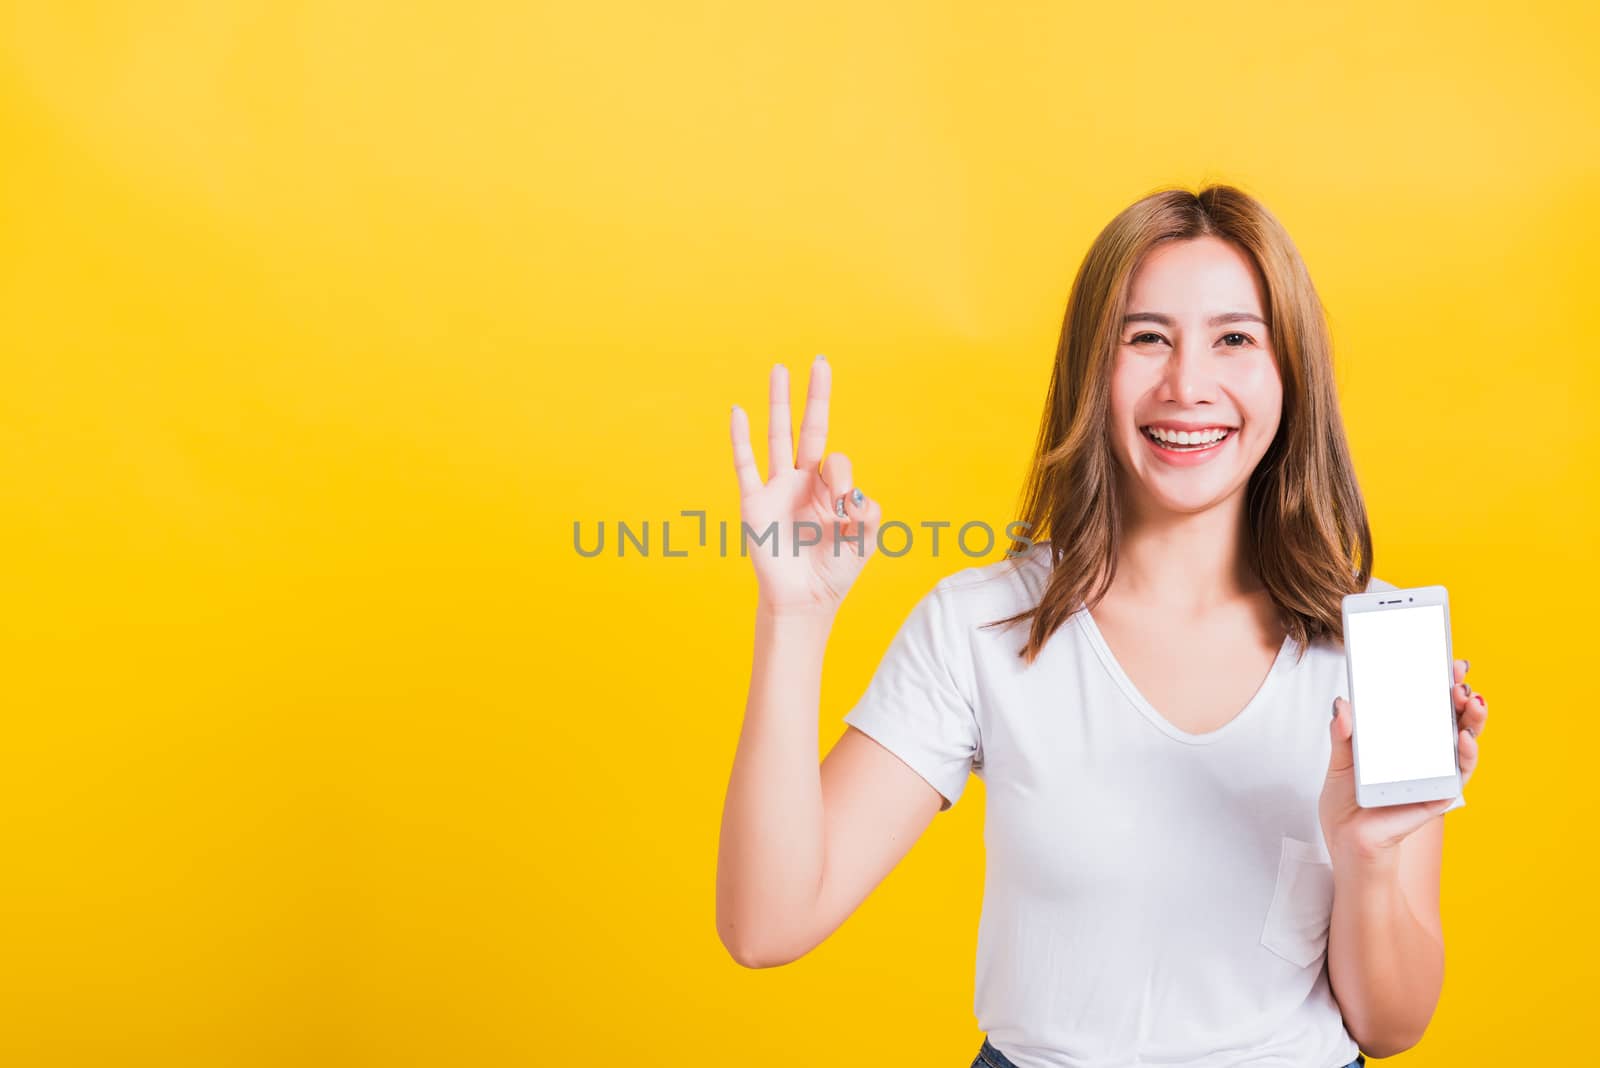 young woman standing smile, holding mobile phone and showing ok  by Sorapop